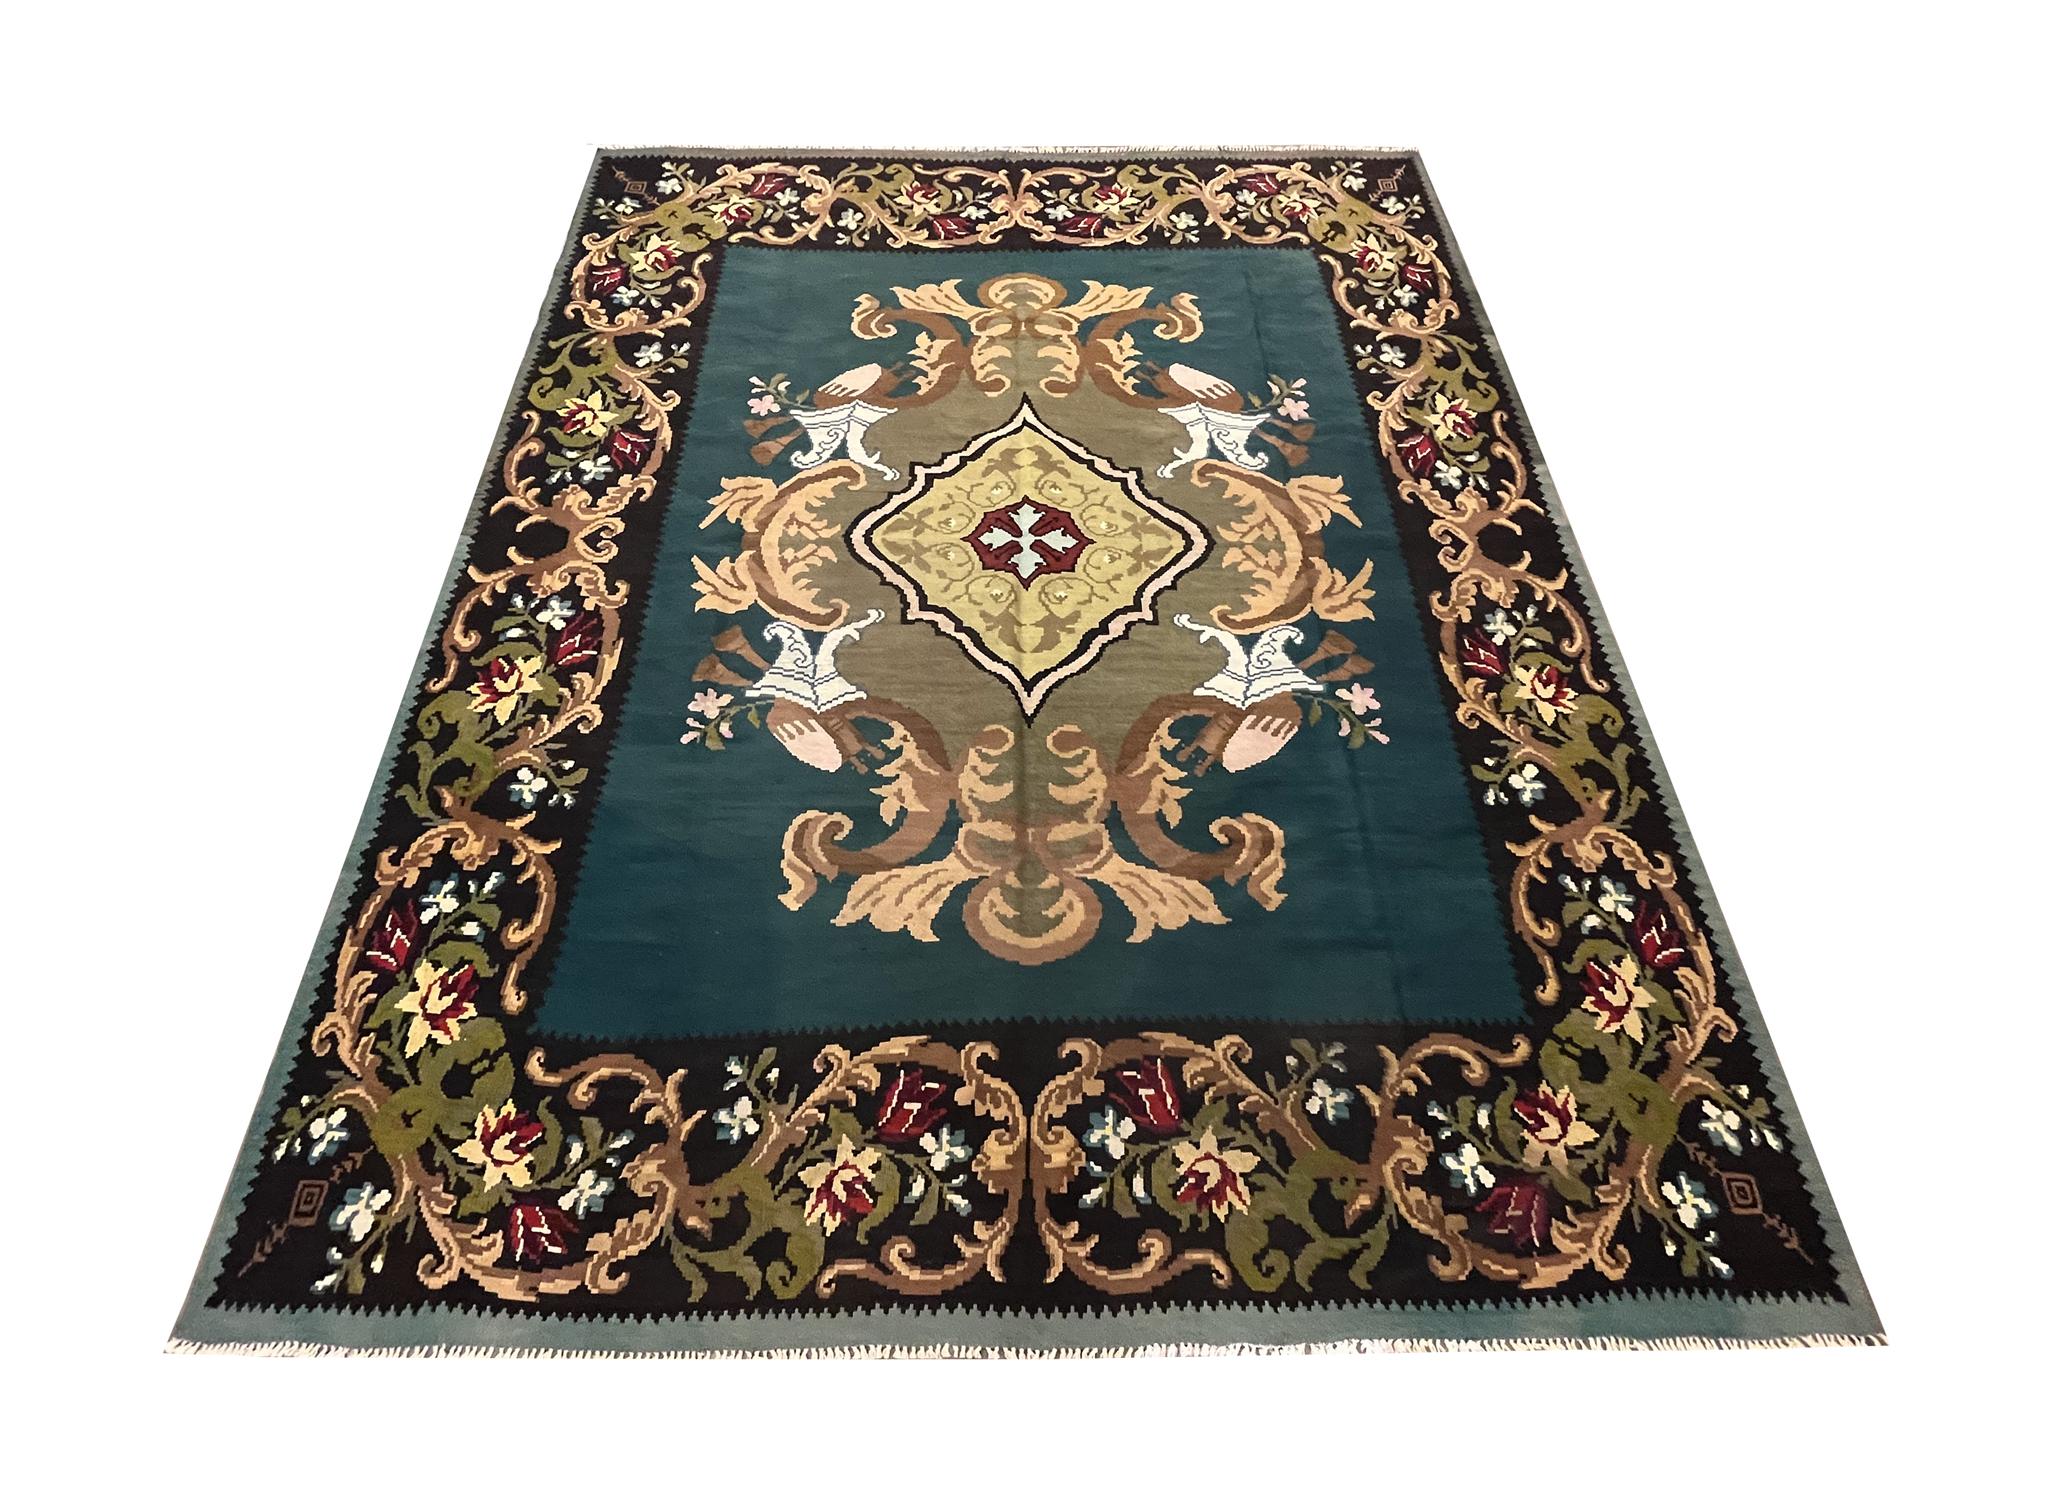 This bold wool kilim is a handwoven masterpiece woven in Moldova circa 1900. The design features a medallion woven on a deep blue-green background in accents of beige, olive green and cream that make up the luxurious patterns. This is then framed by